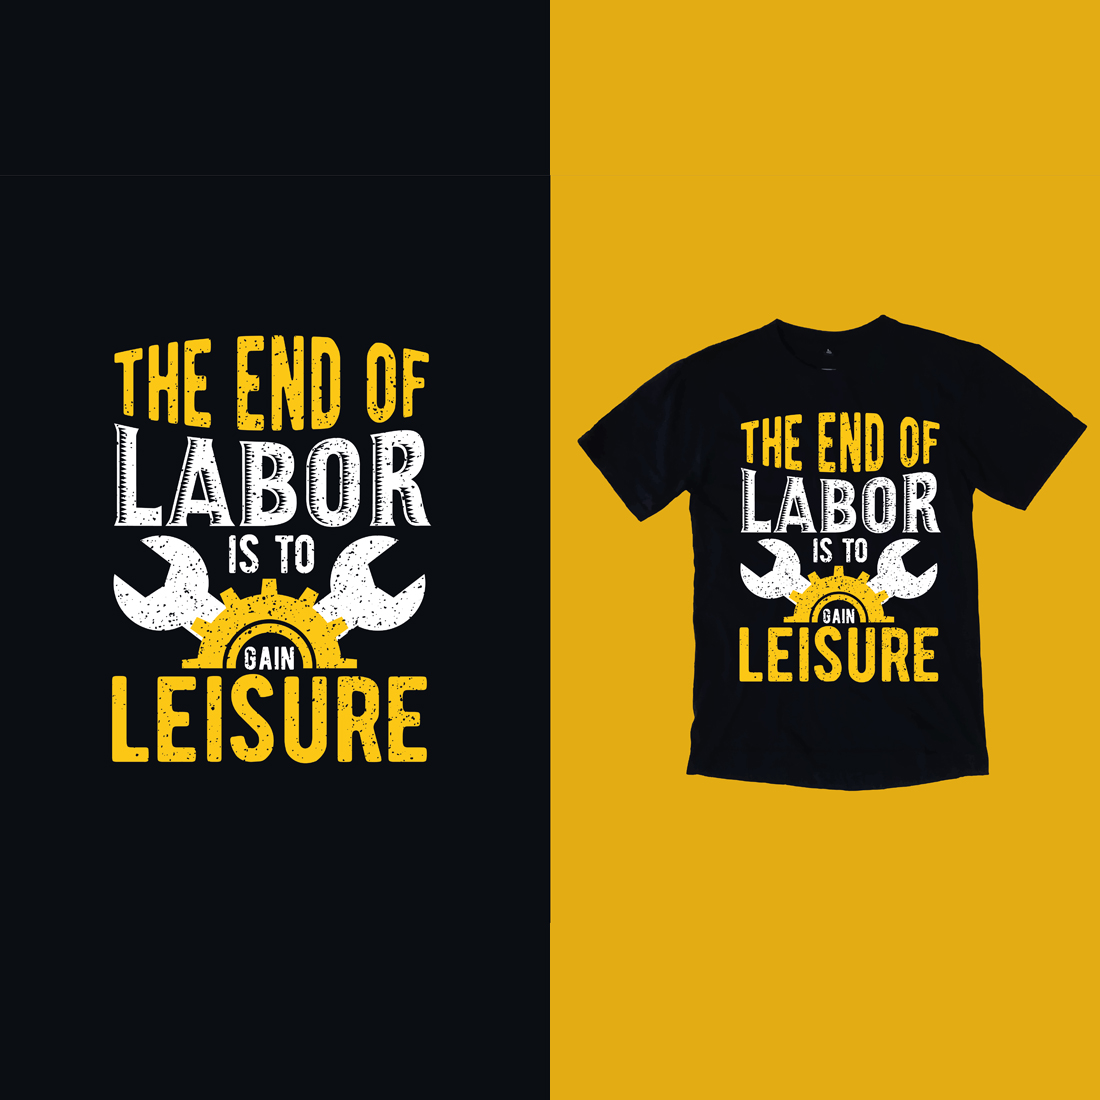 Labor Day, international labor day, typography T-shirt Design cover image.